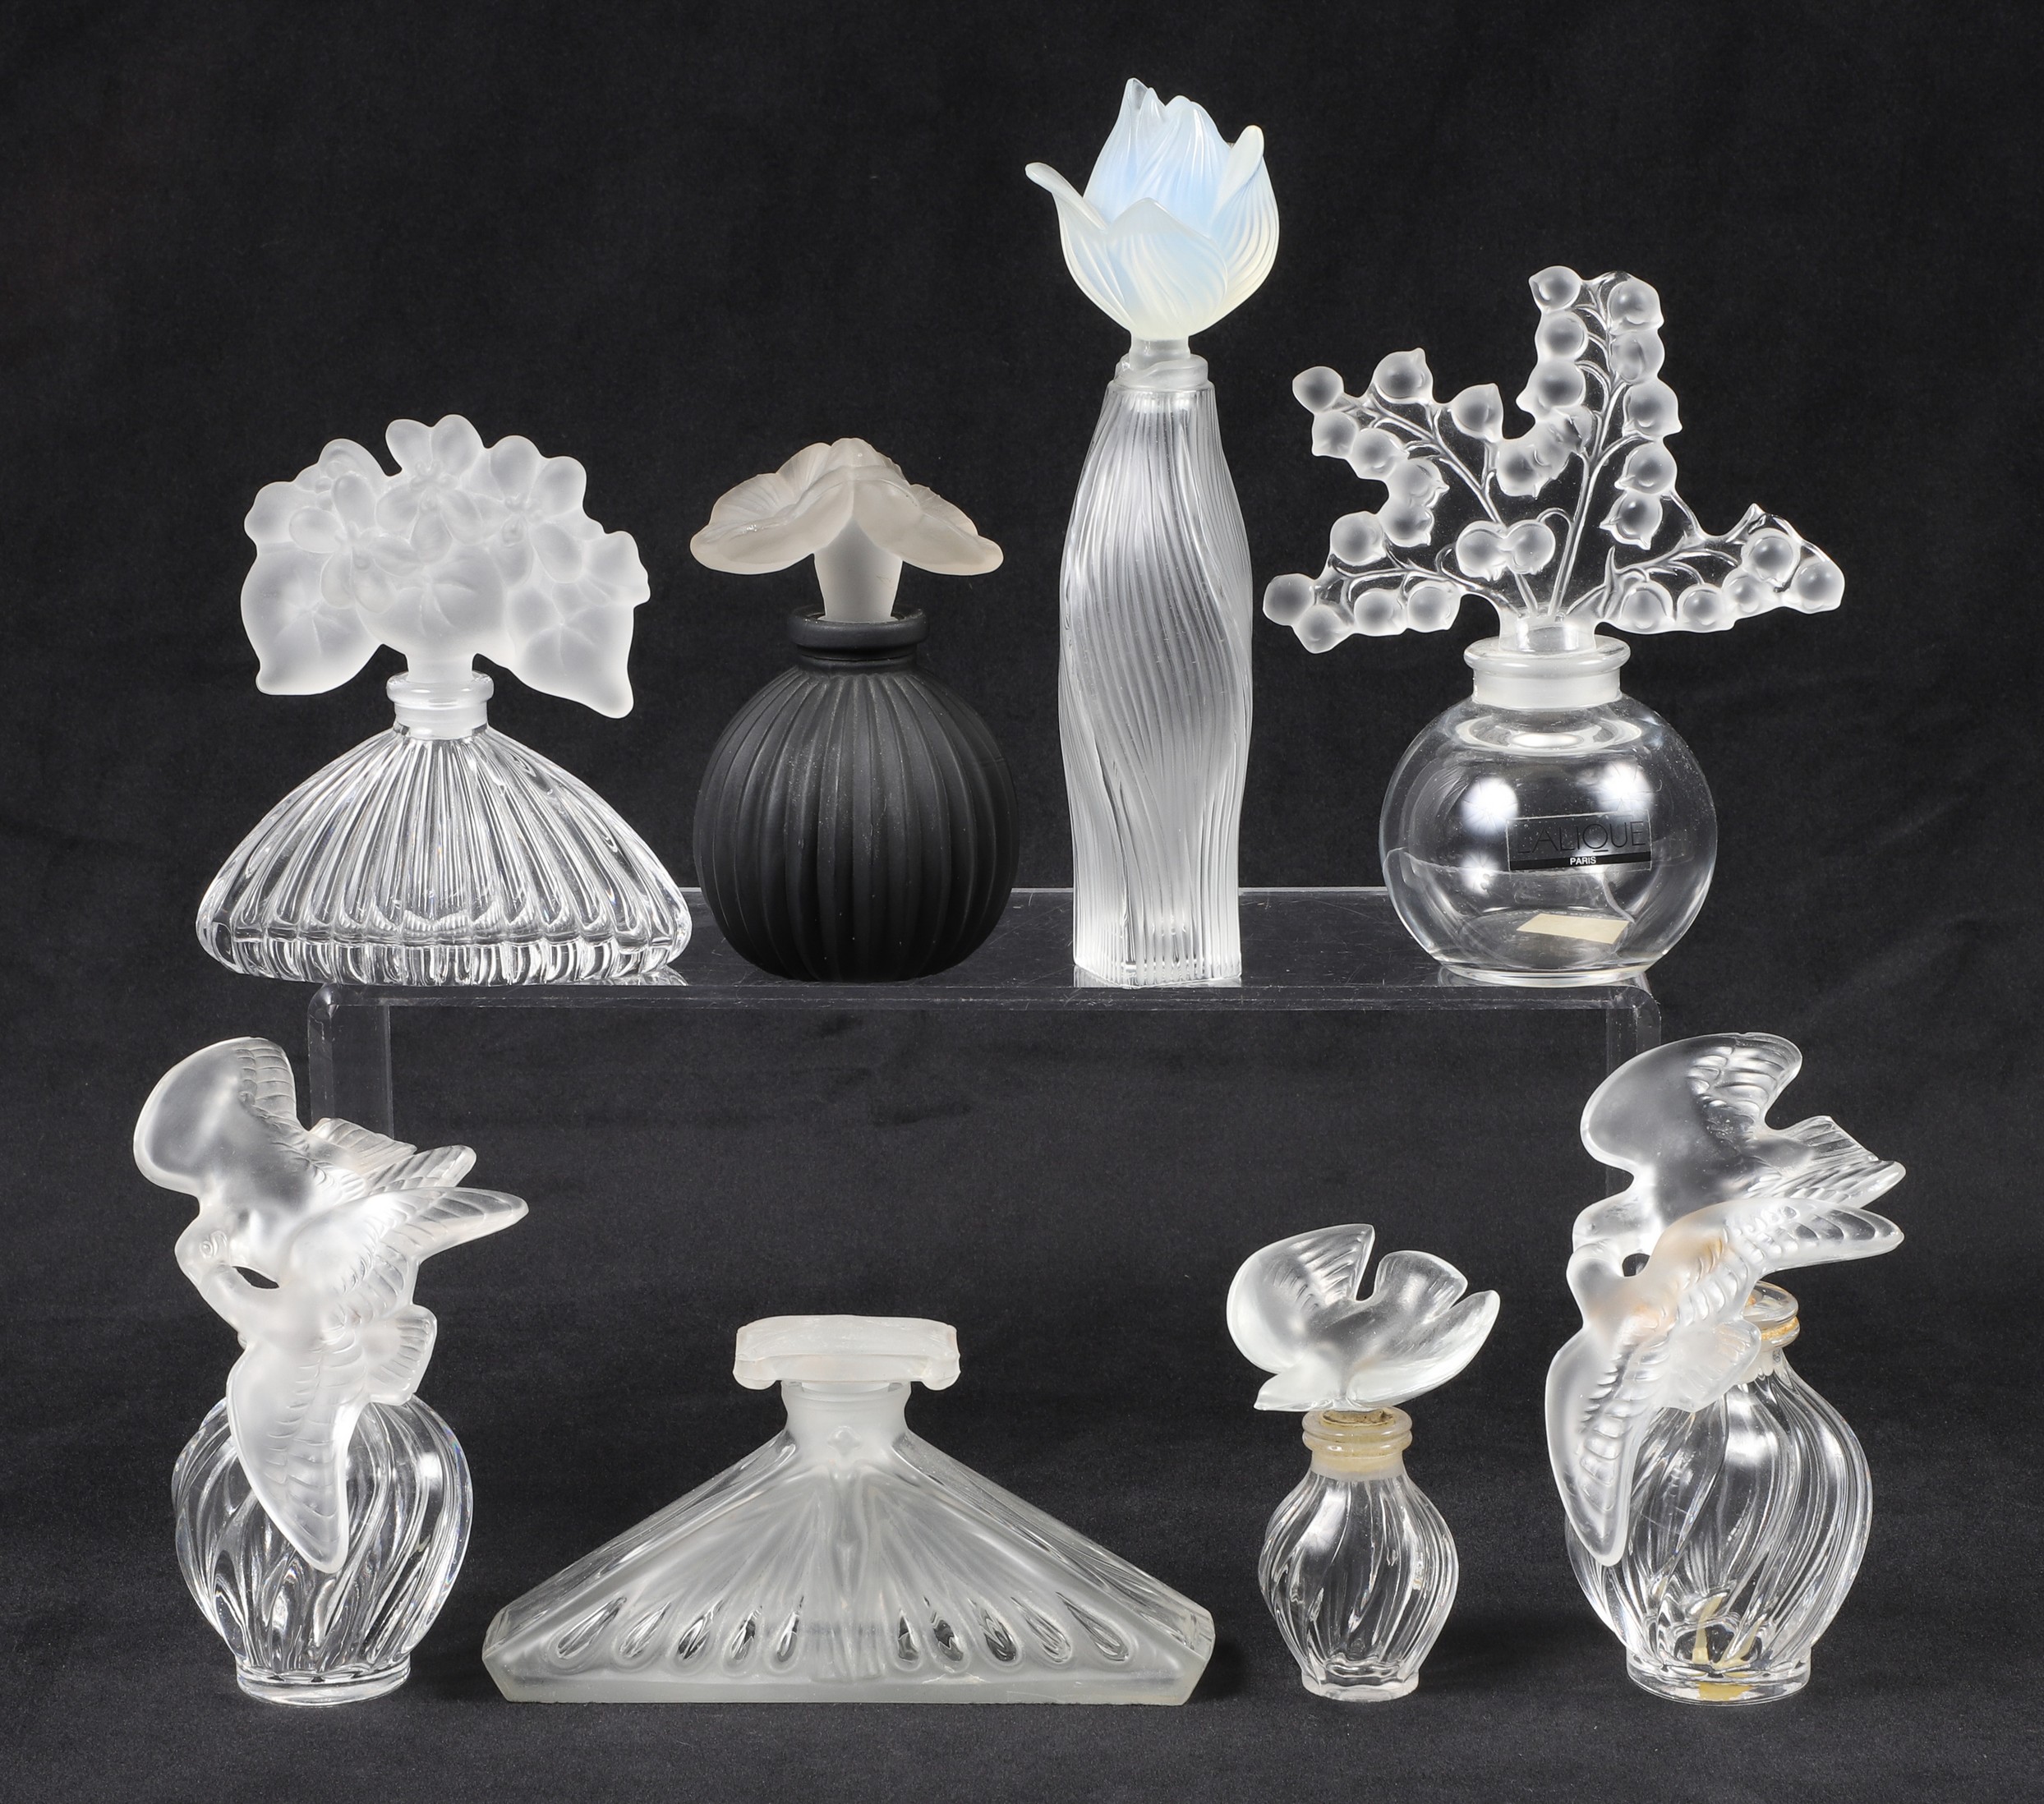  8 Lalique and style scent bottles 2e07ab